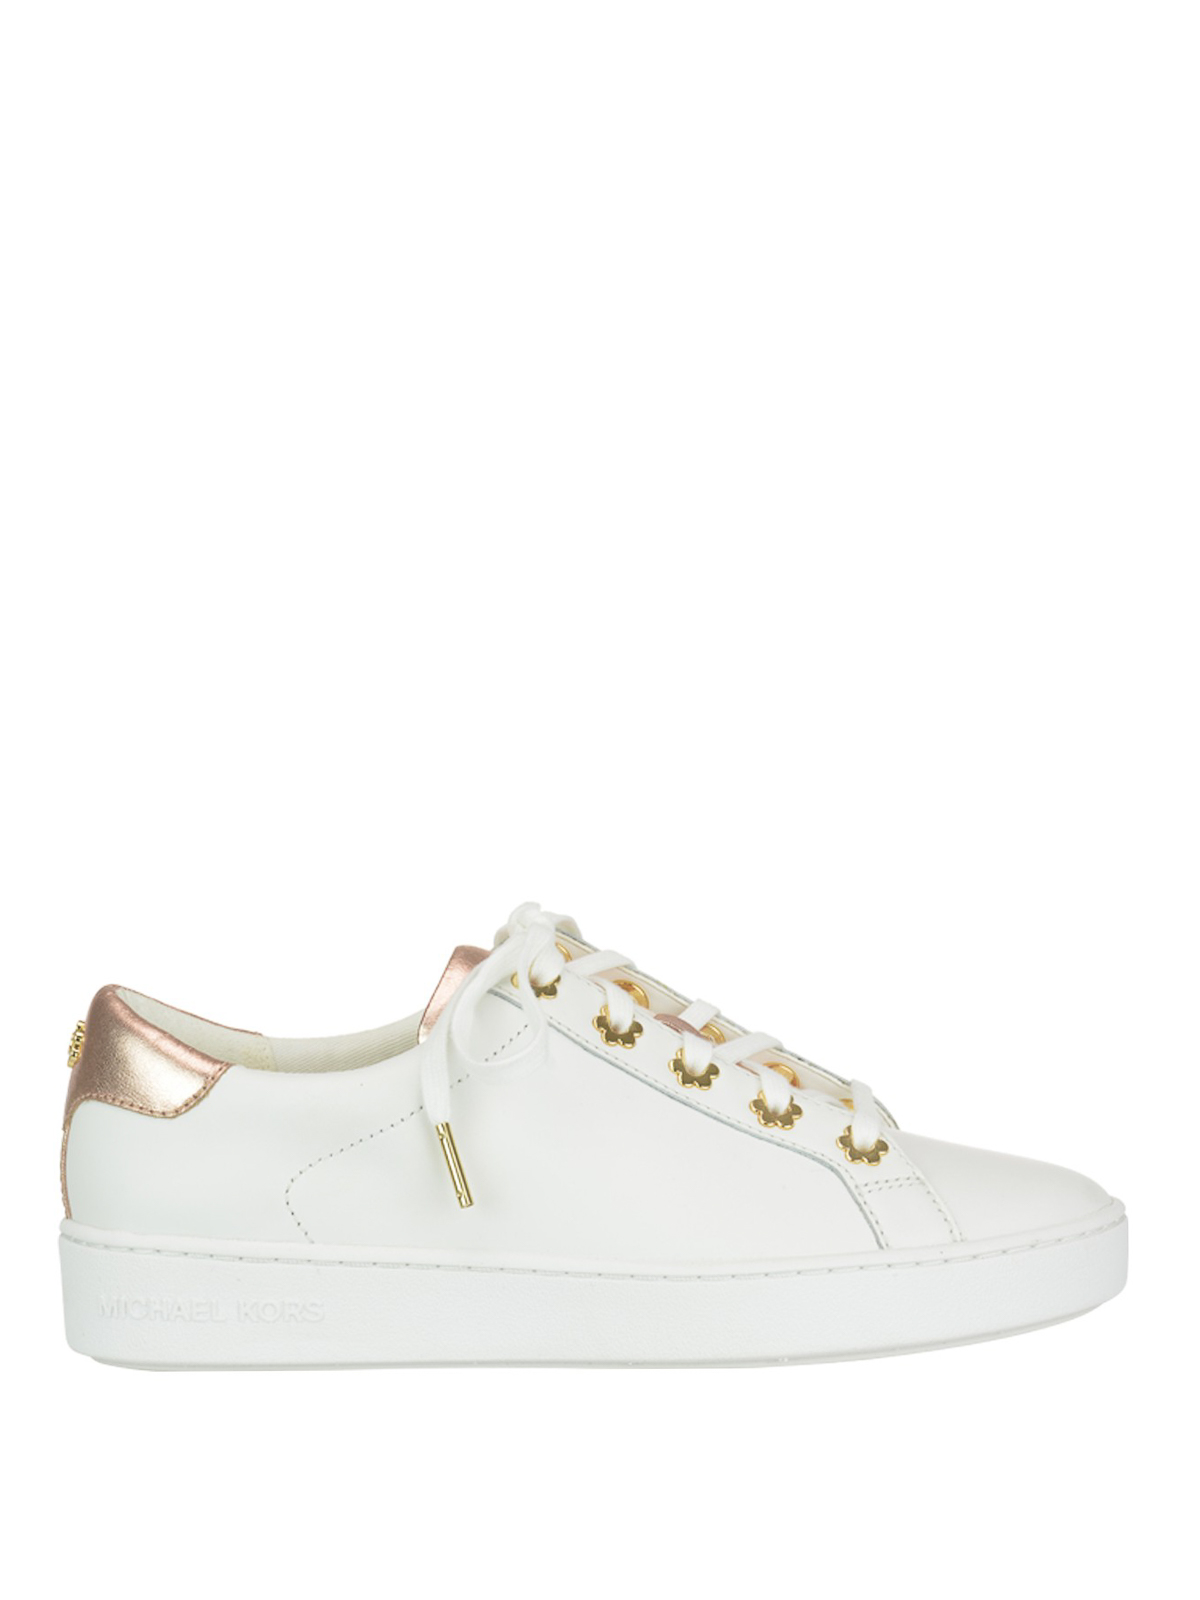 DUT03 RETAIL MICHAEL KORS IRVING SNAKE EMBOSSED STRIPE LACE UP LEATHER  SNEAKERS  Shopee Philippines